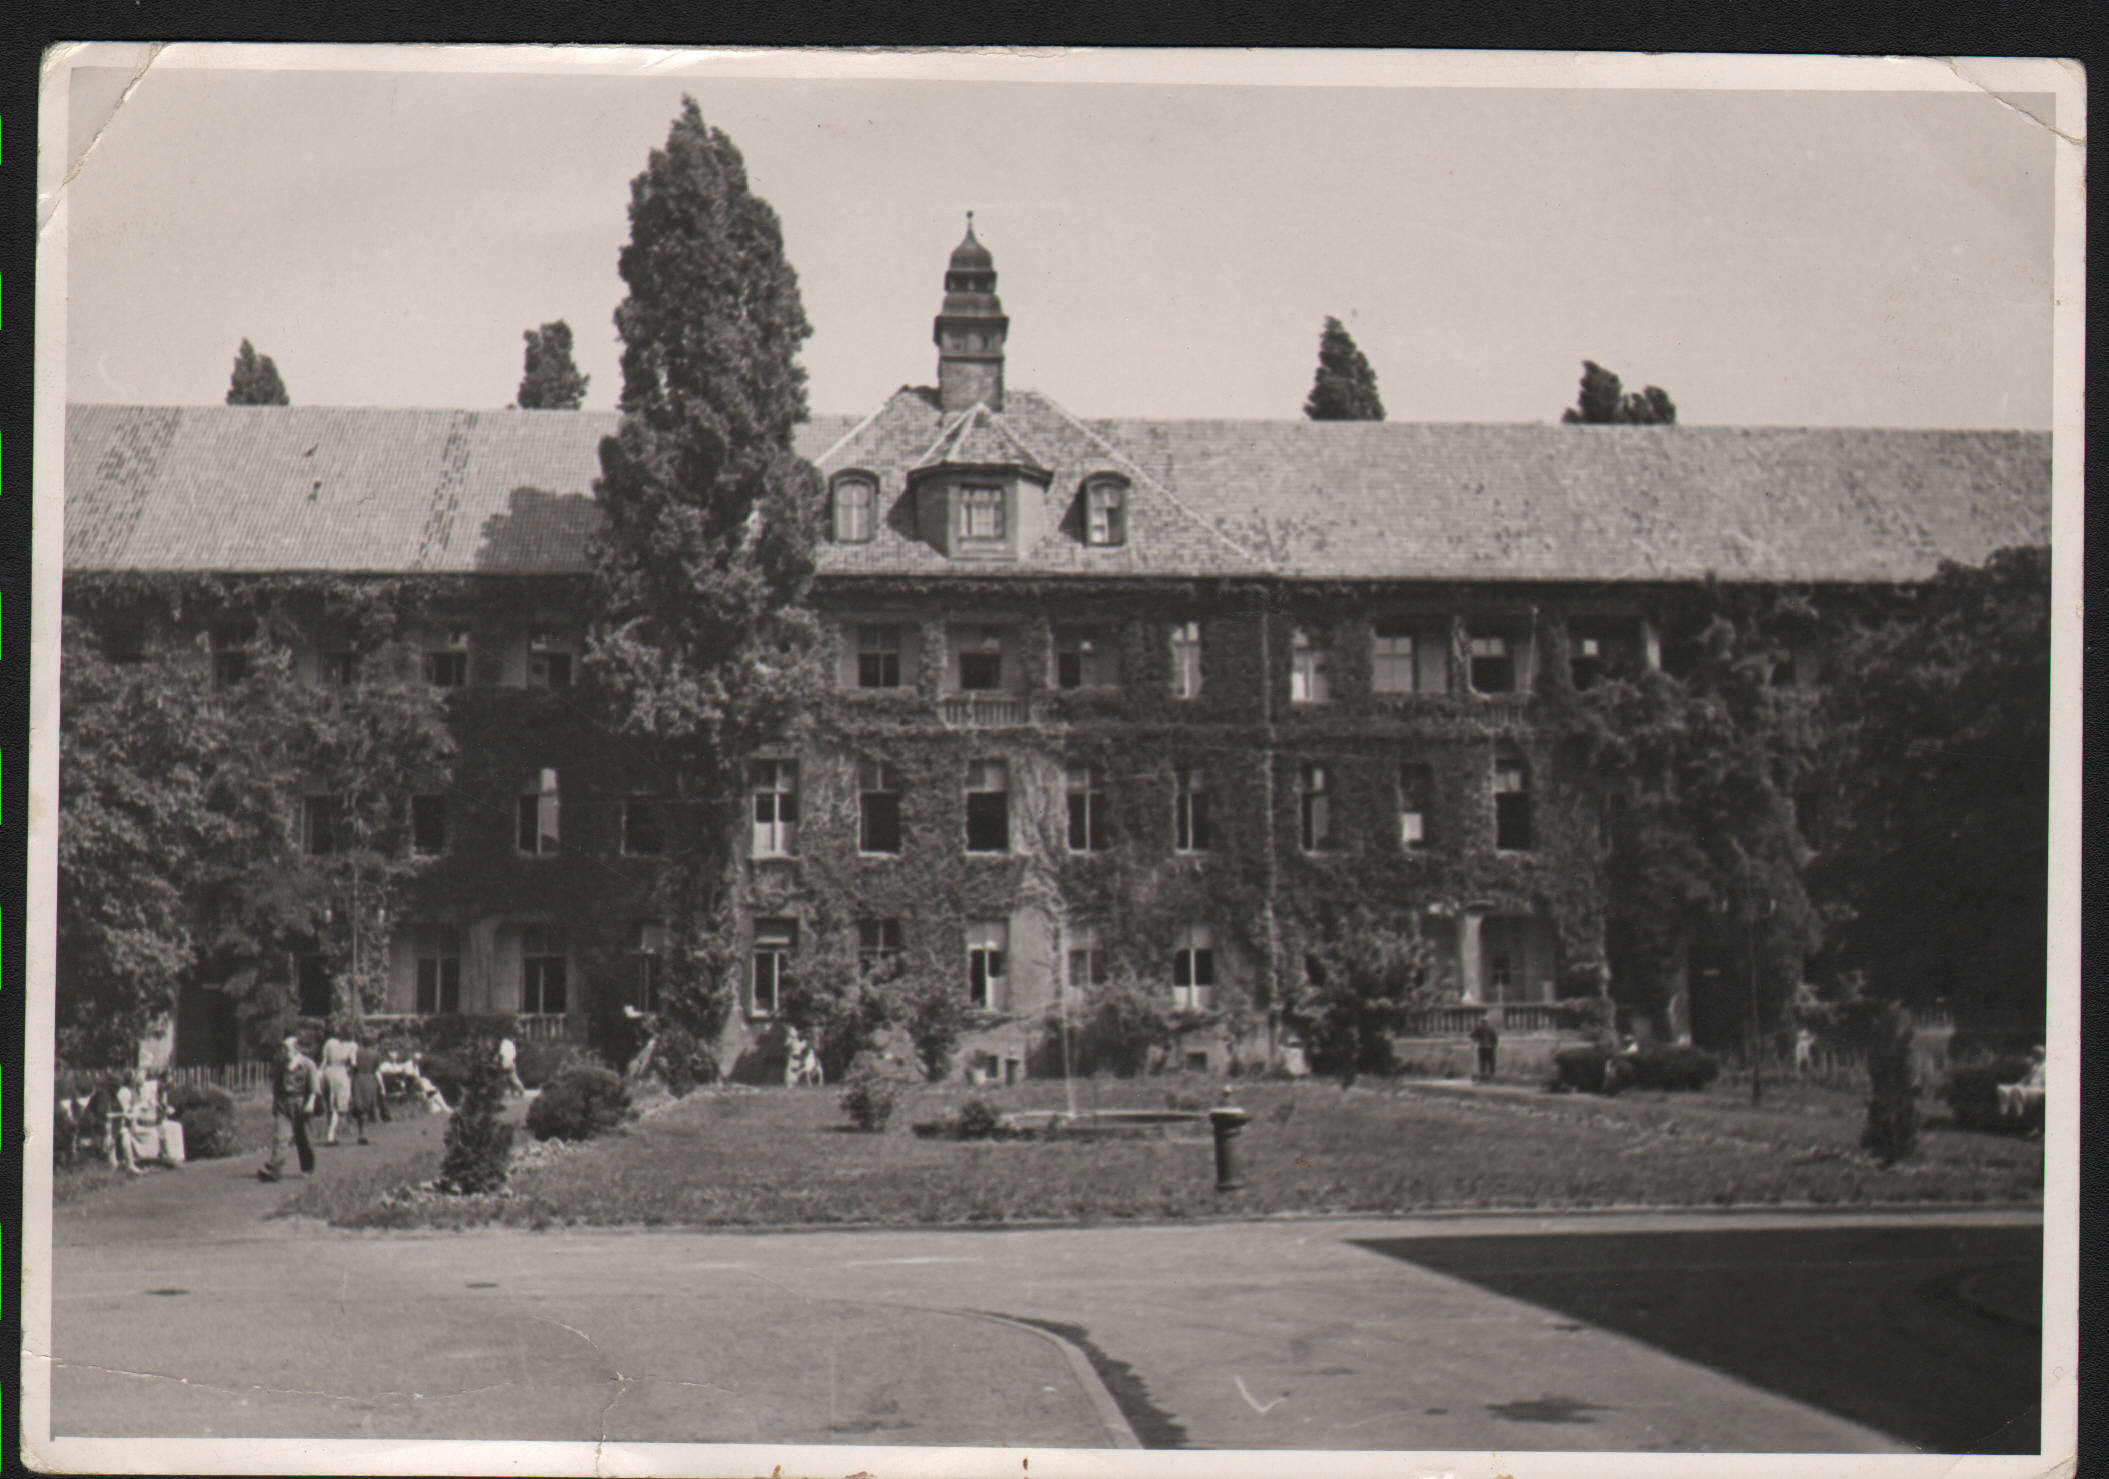 The Jewish Hospital in 1930